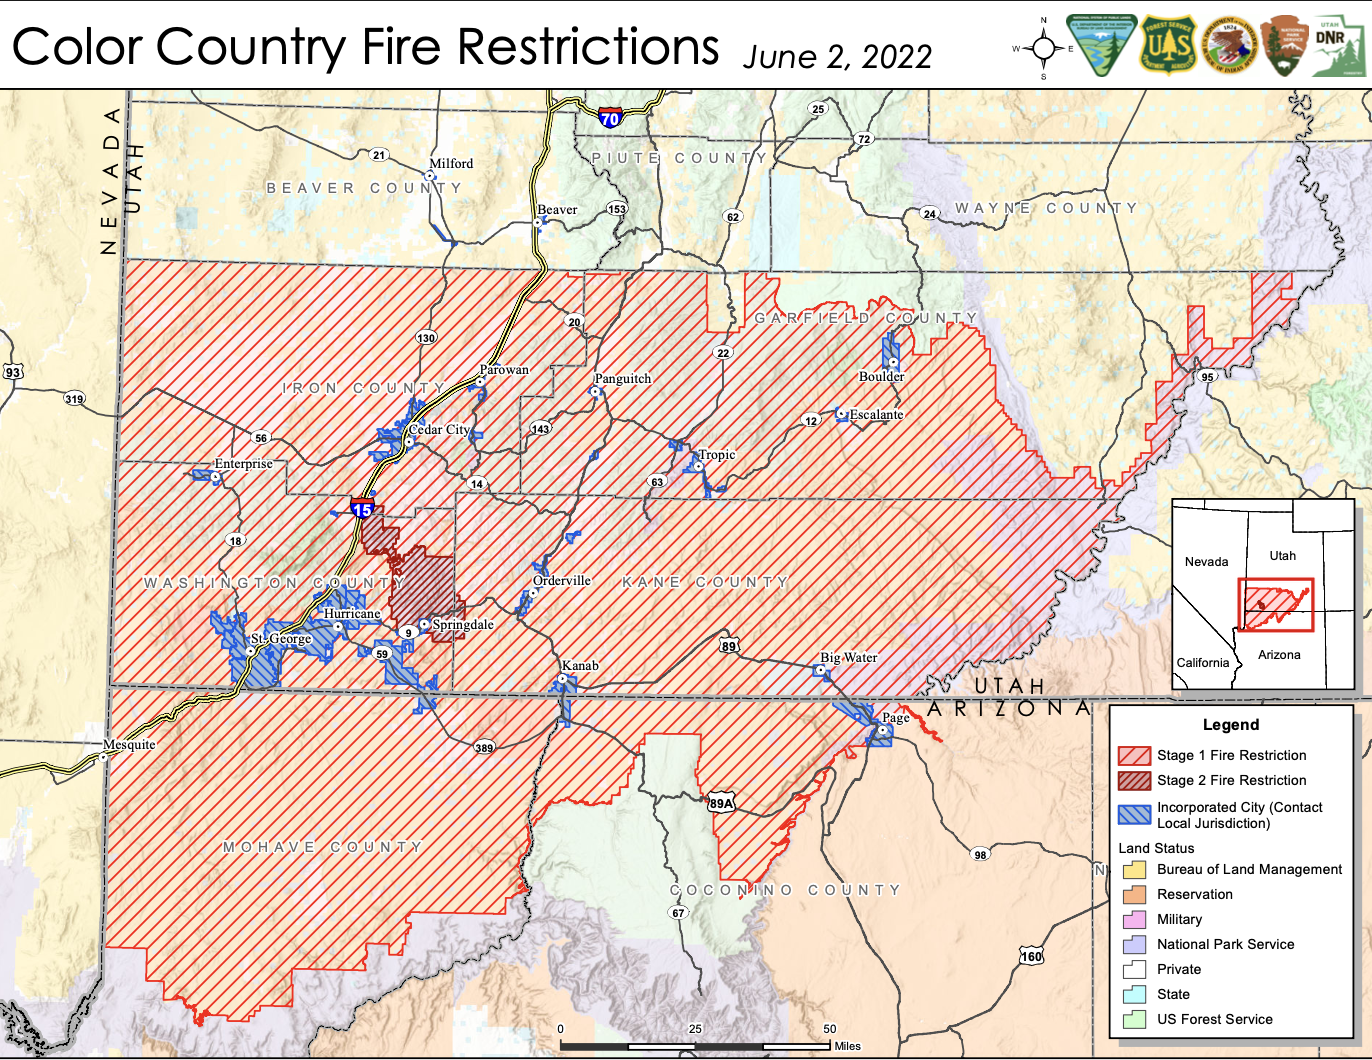 Increase in seasonal danger prompts issuance of fire restrictions